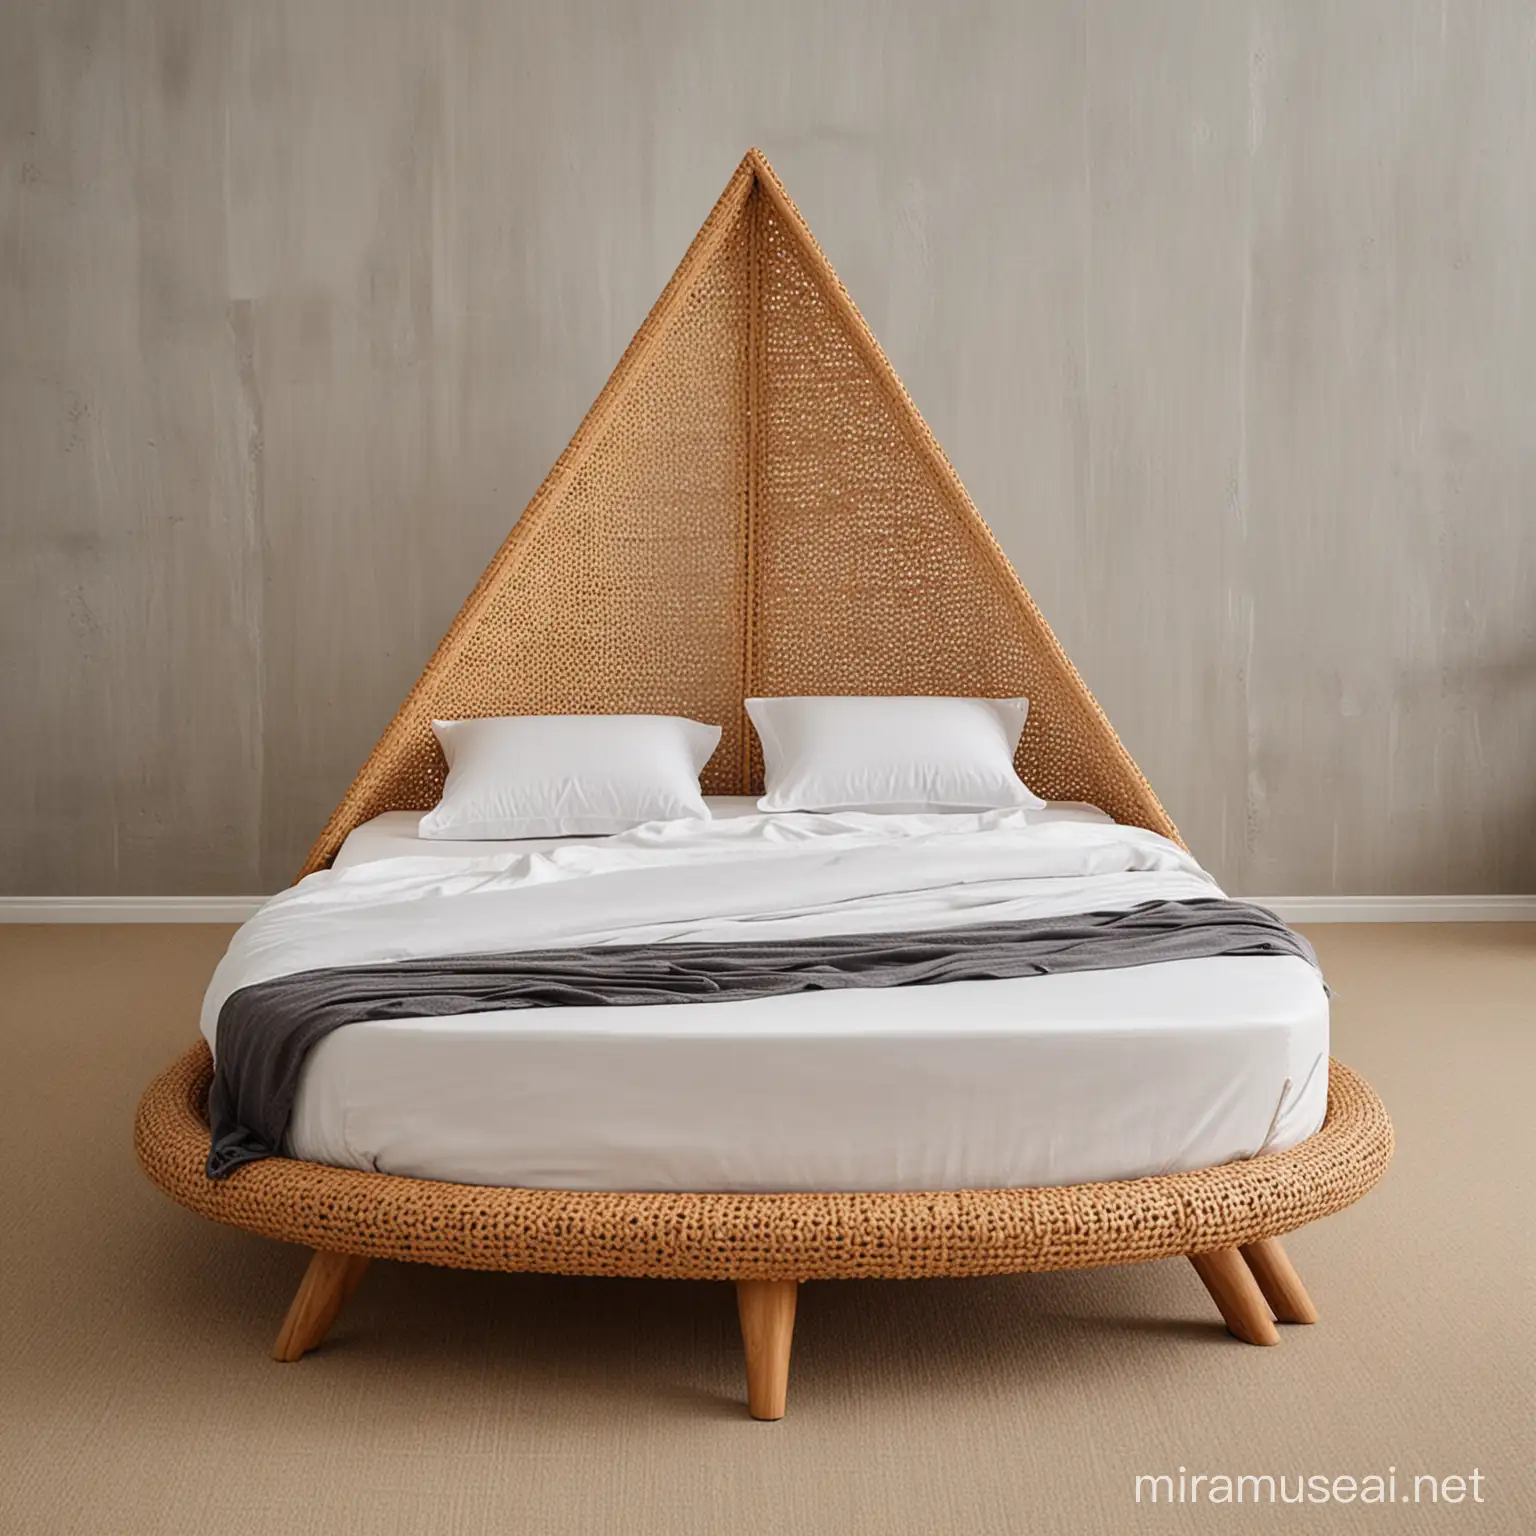 unique and modern single bed with rattan and wood material triangle  shape